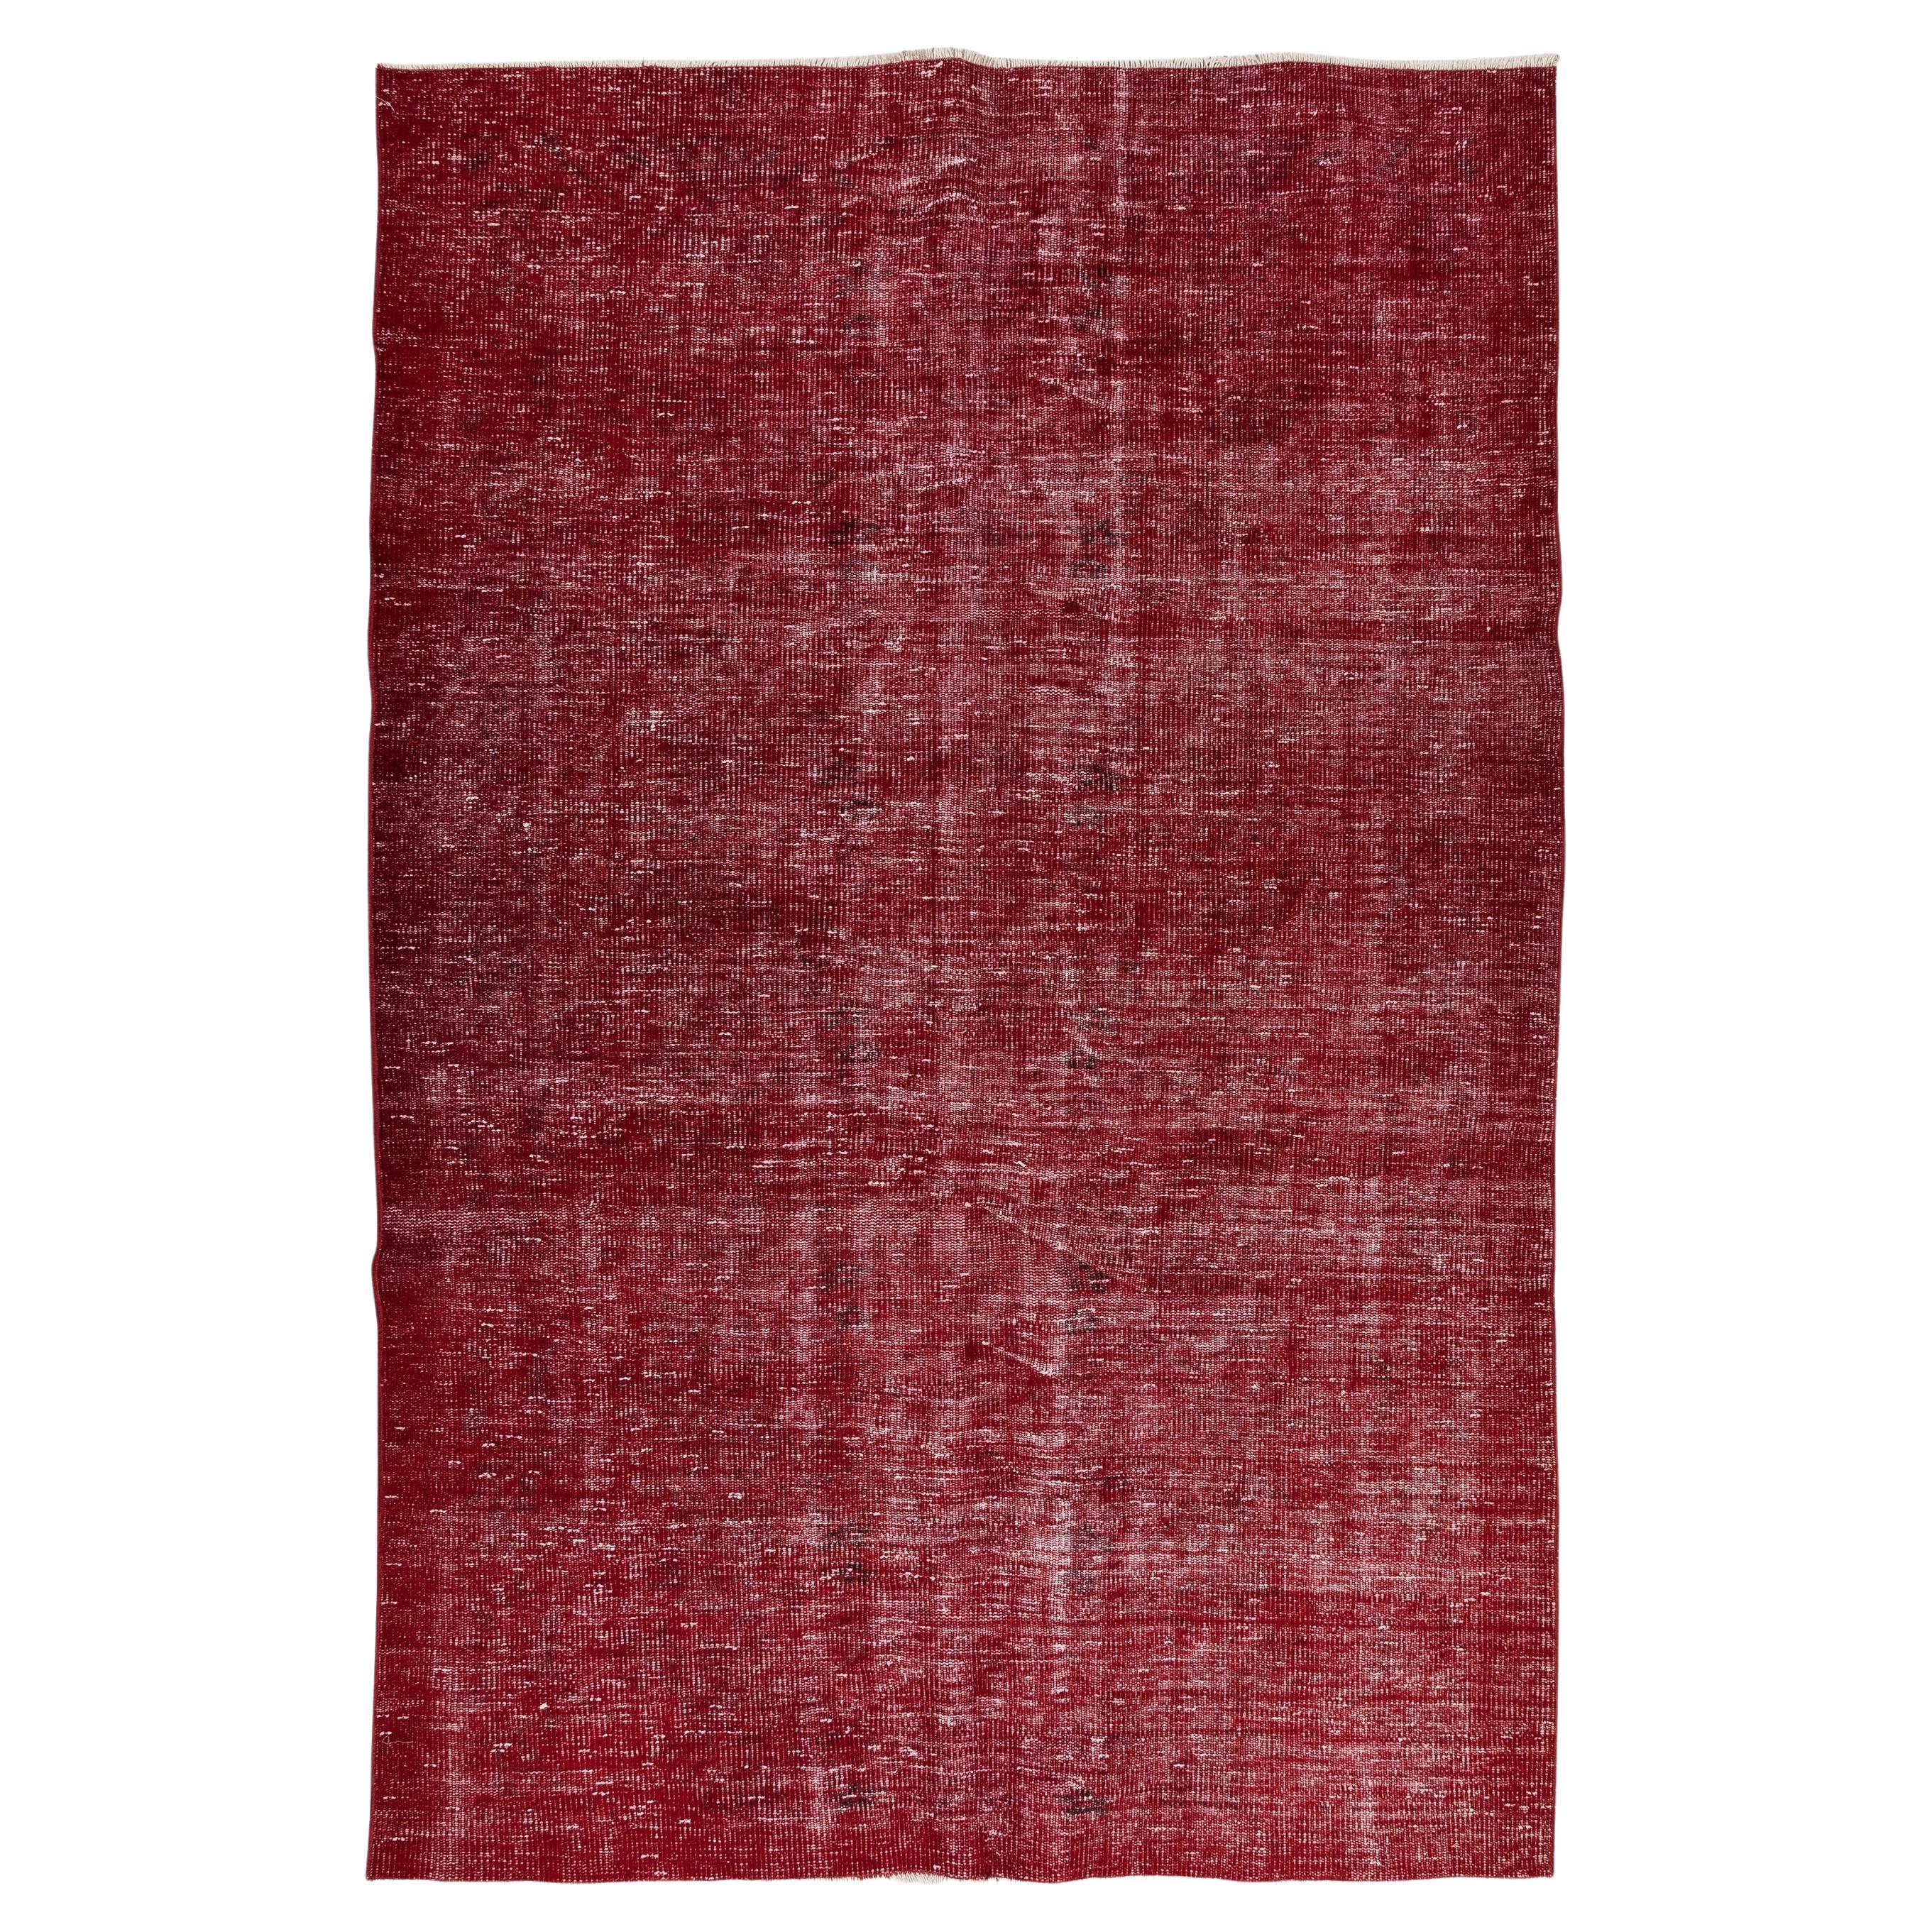 5.6x8.4 Ft Turkish 1960s Hand Made Solid Rug Re-Dyed in Red for Modern Interiors For Sale